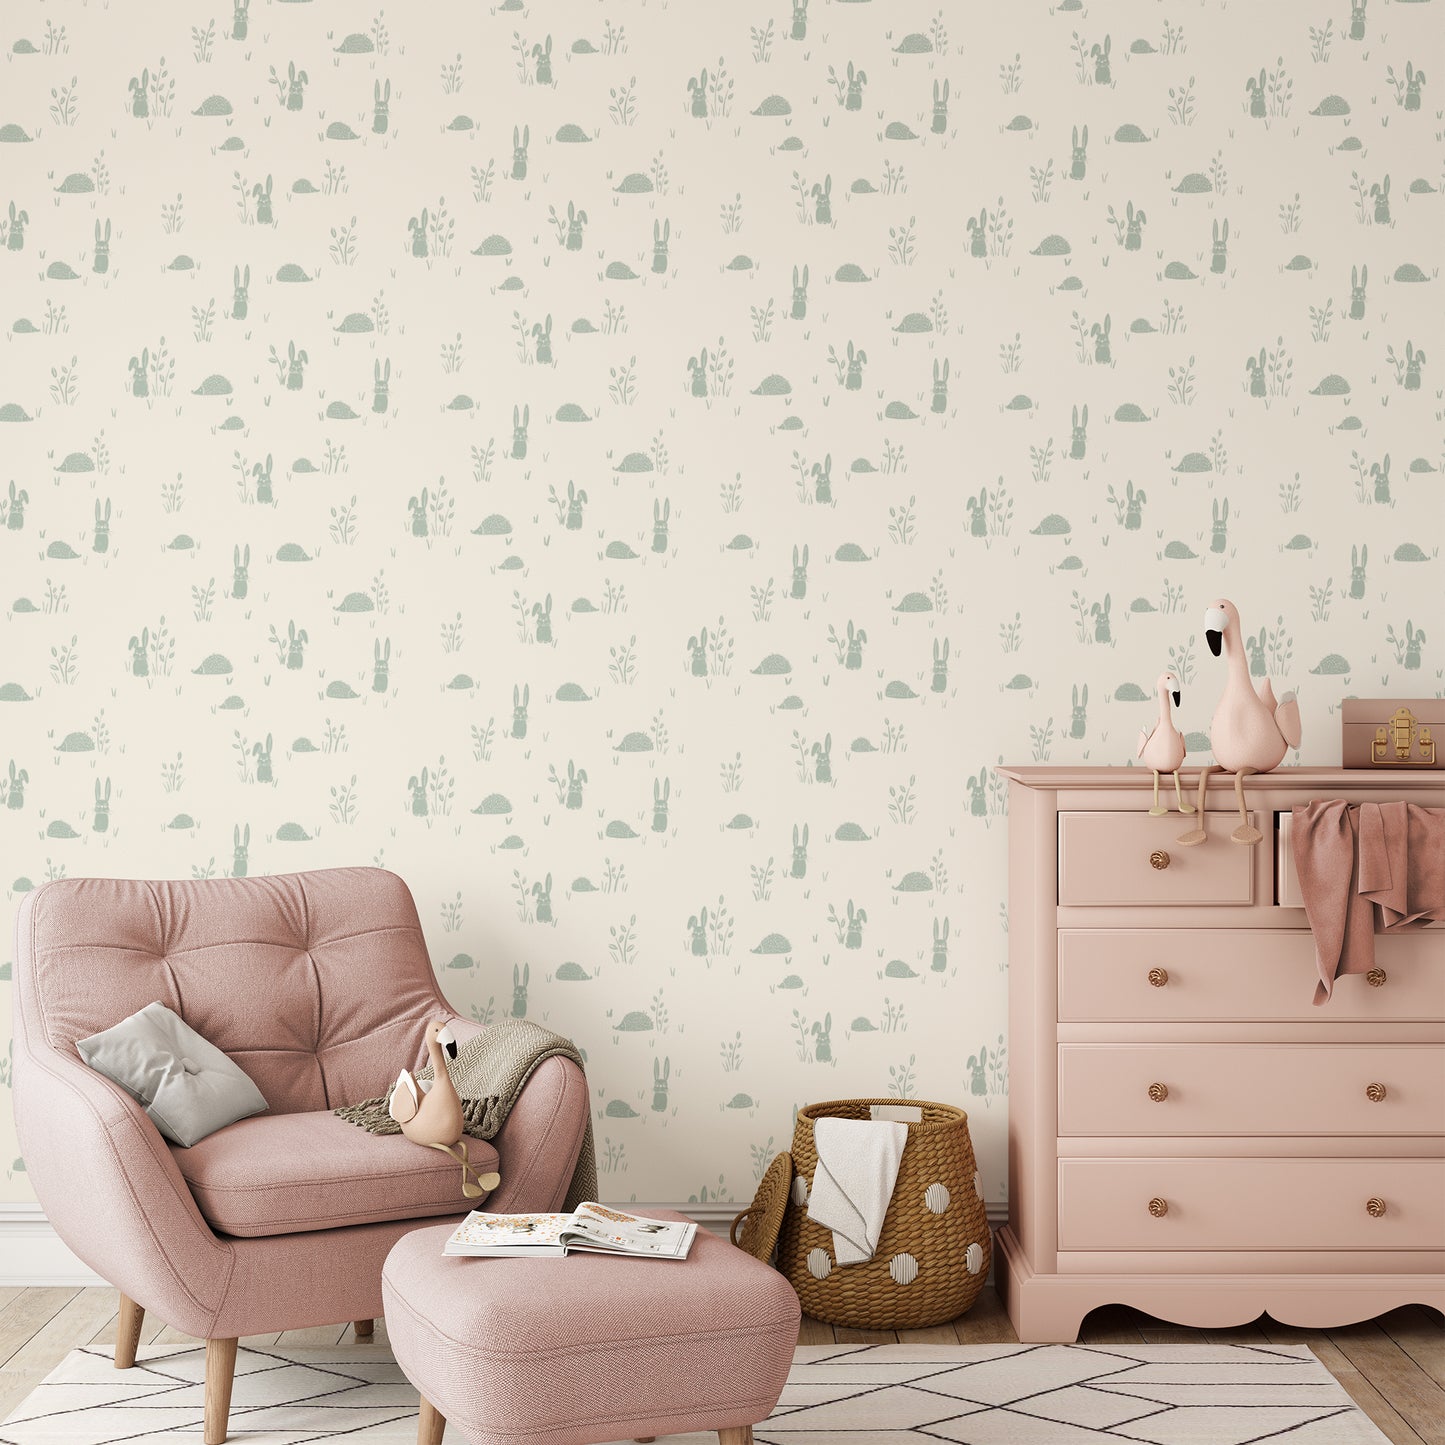 Hedgehogs and Rabbits Wallpaper in Sea Green shown in a nursery.